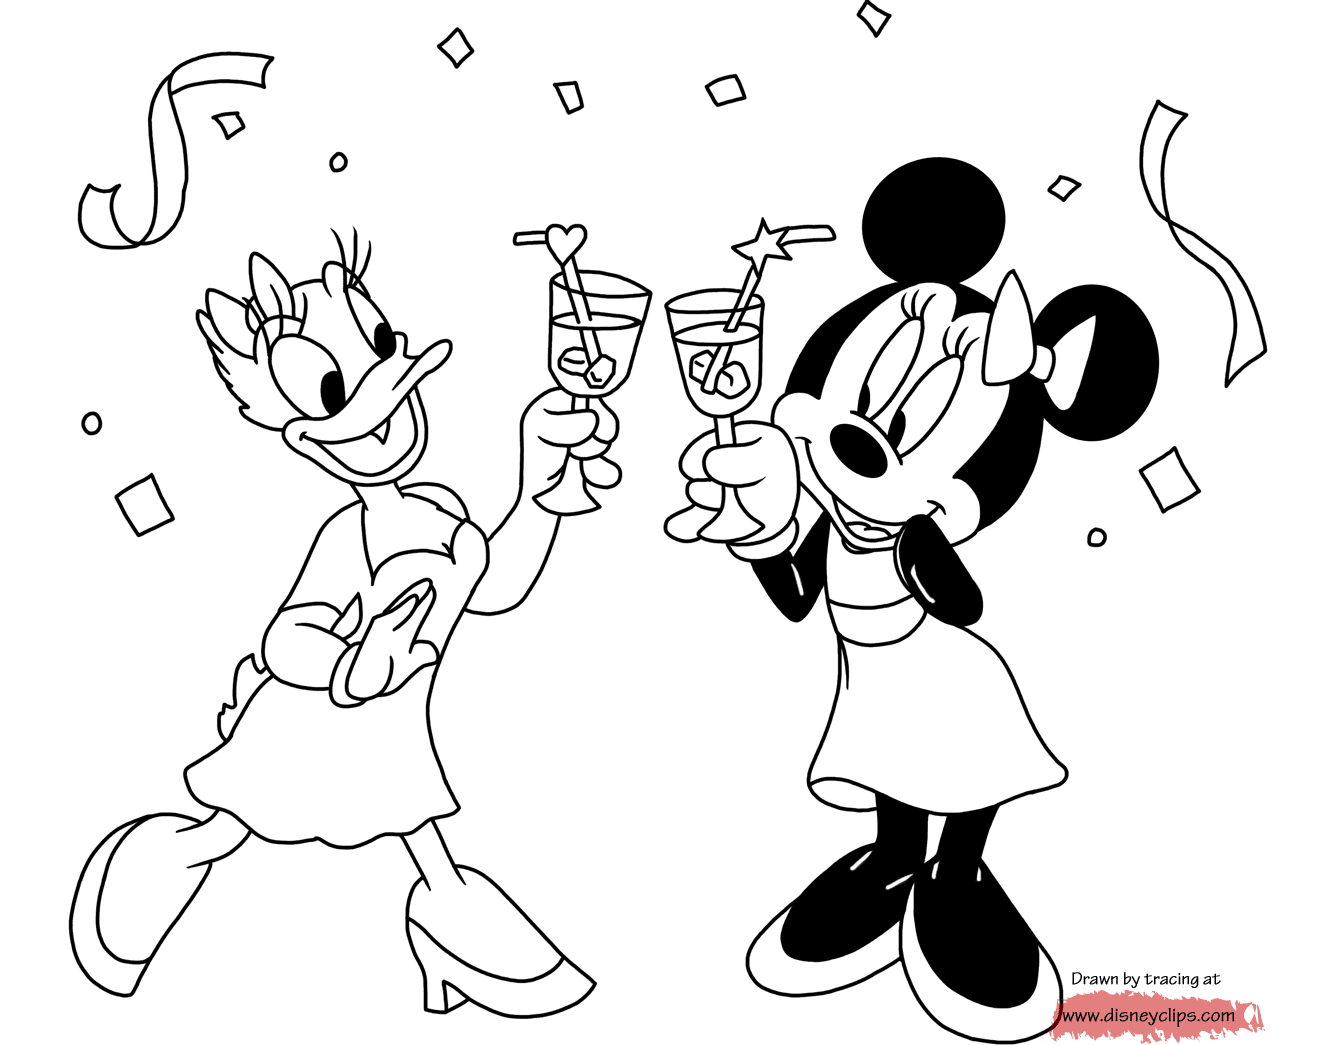 Mickey Mouse & Friends Coloring Pages | Disney Coloring Book